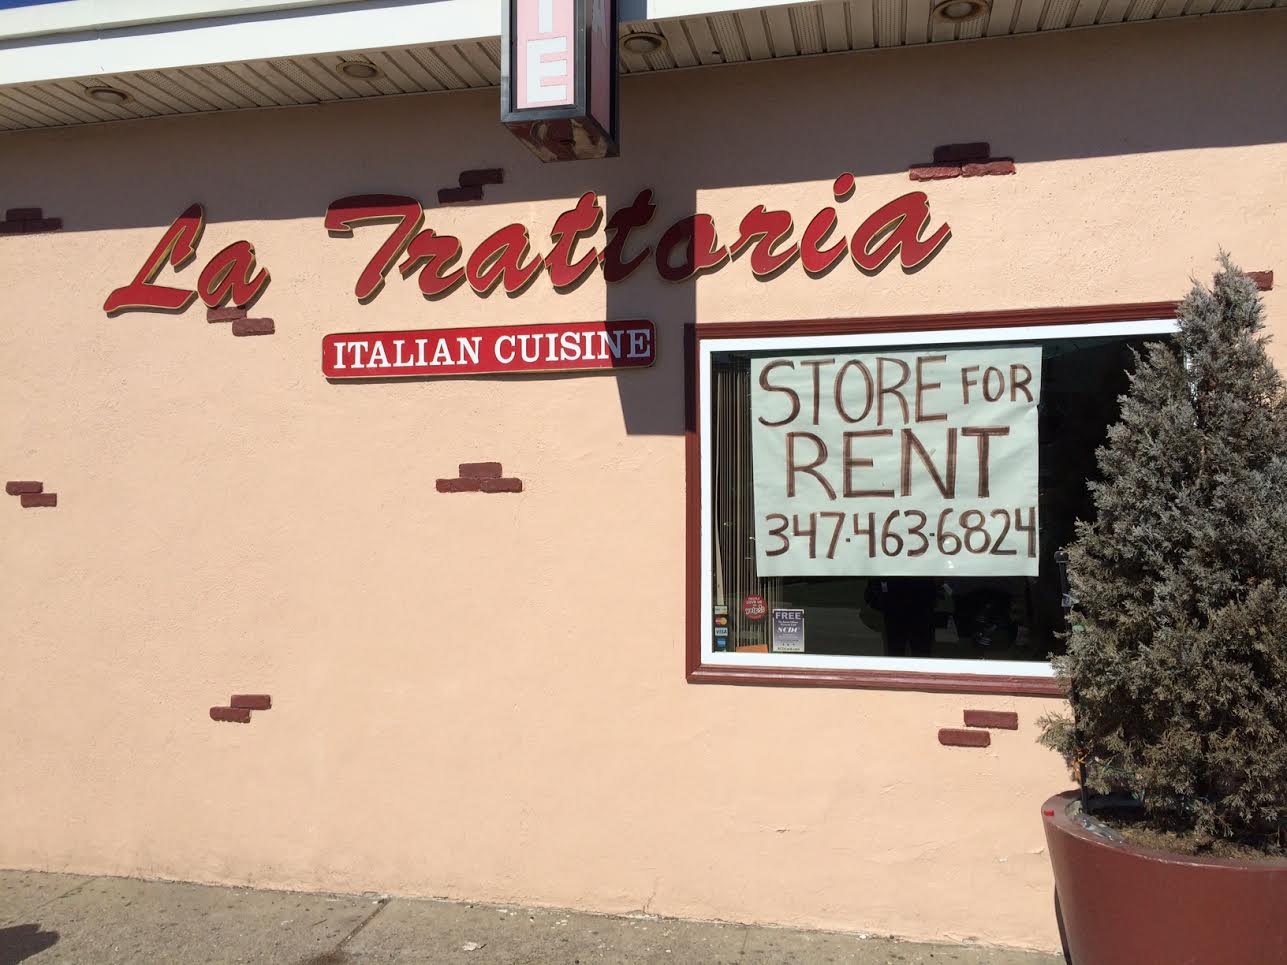 La Trattoria On Avenue U Now Closed After More Than 25 Years